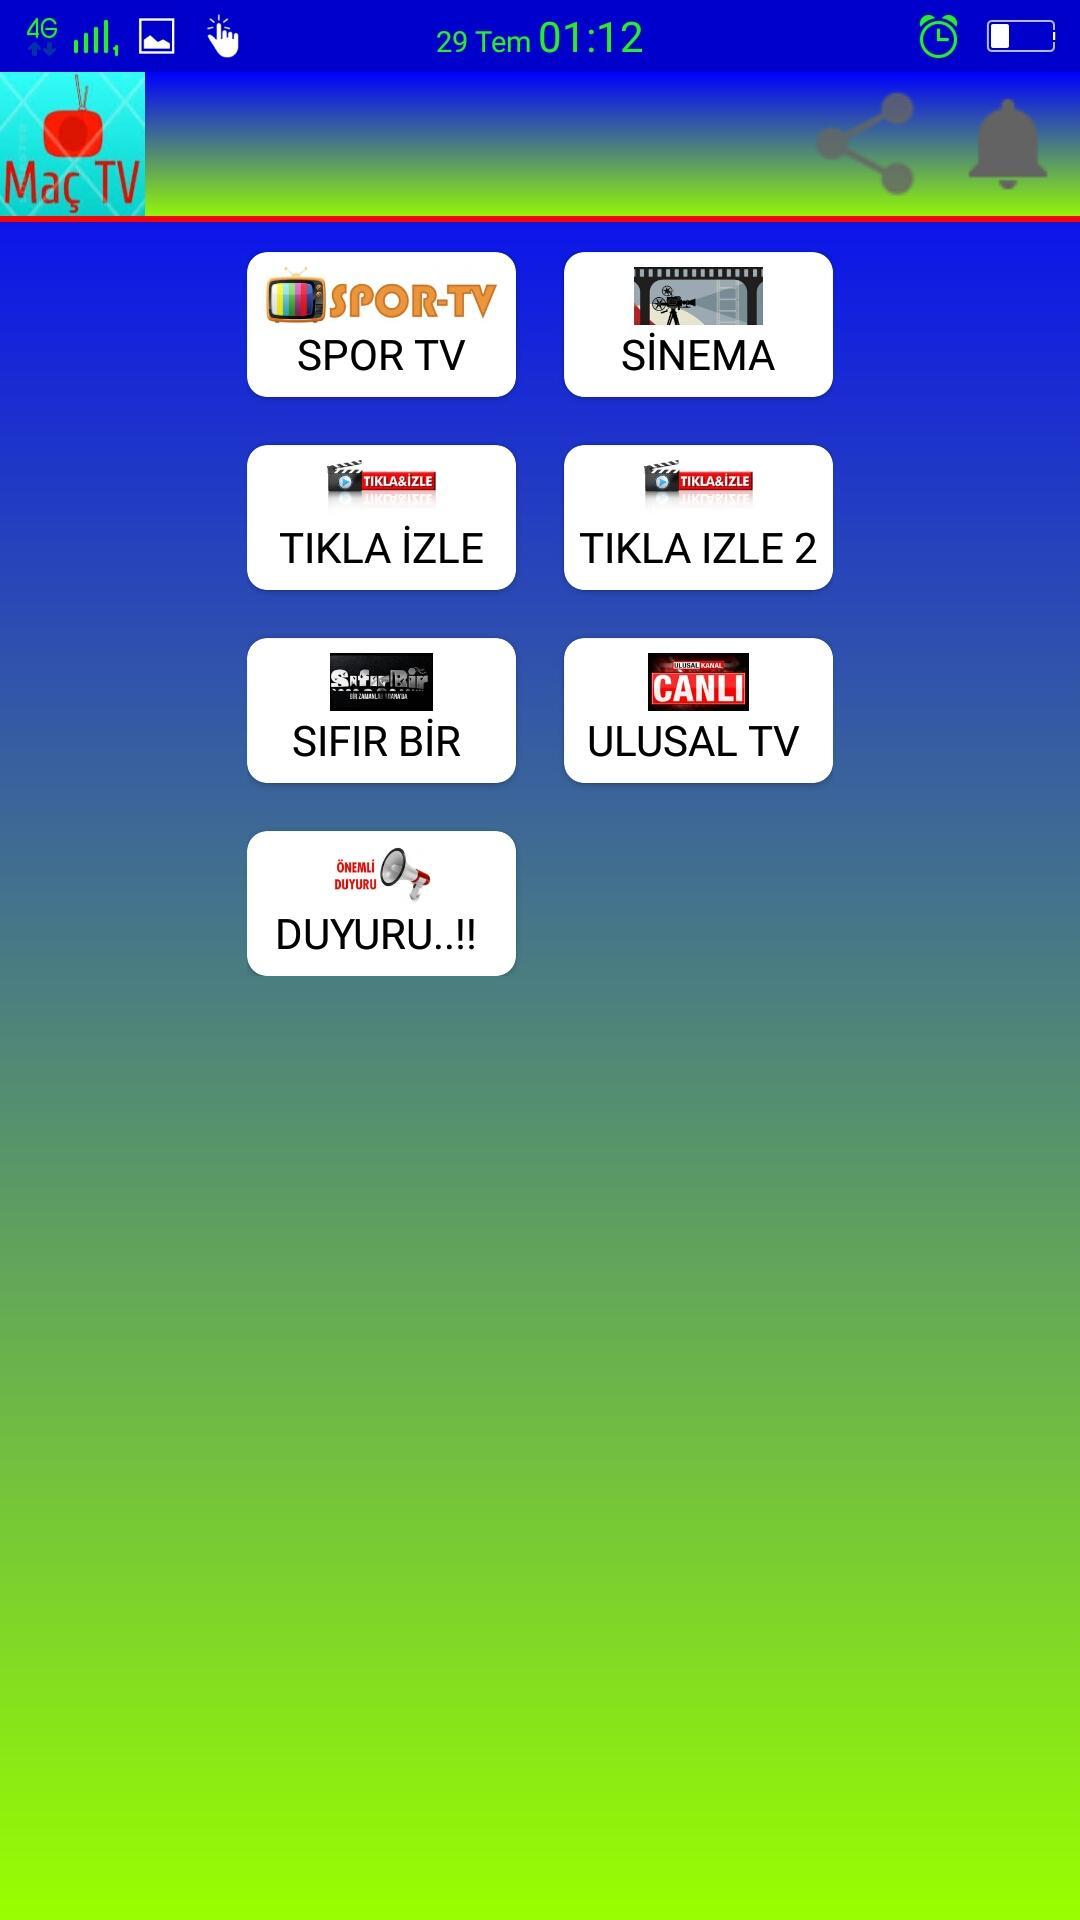 Maç Tv for Android - APK Download